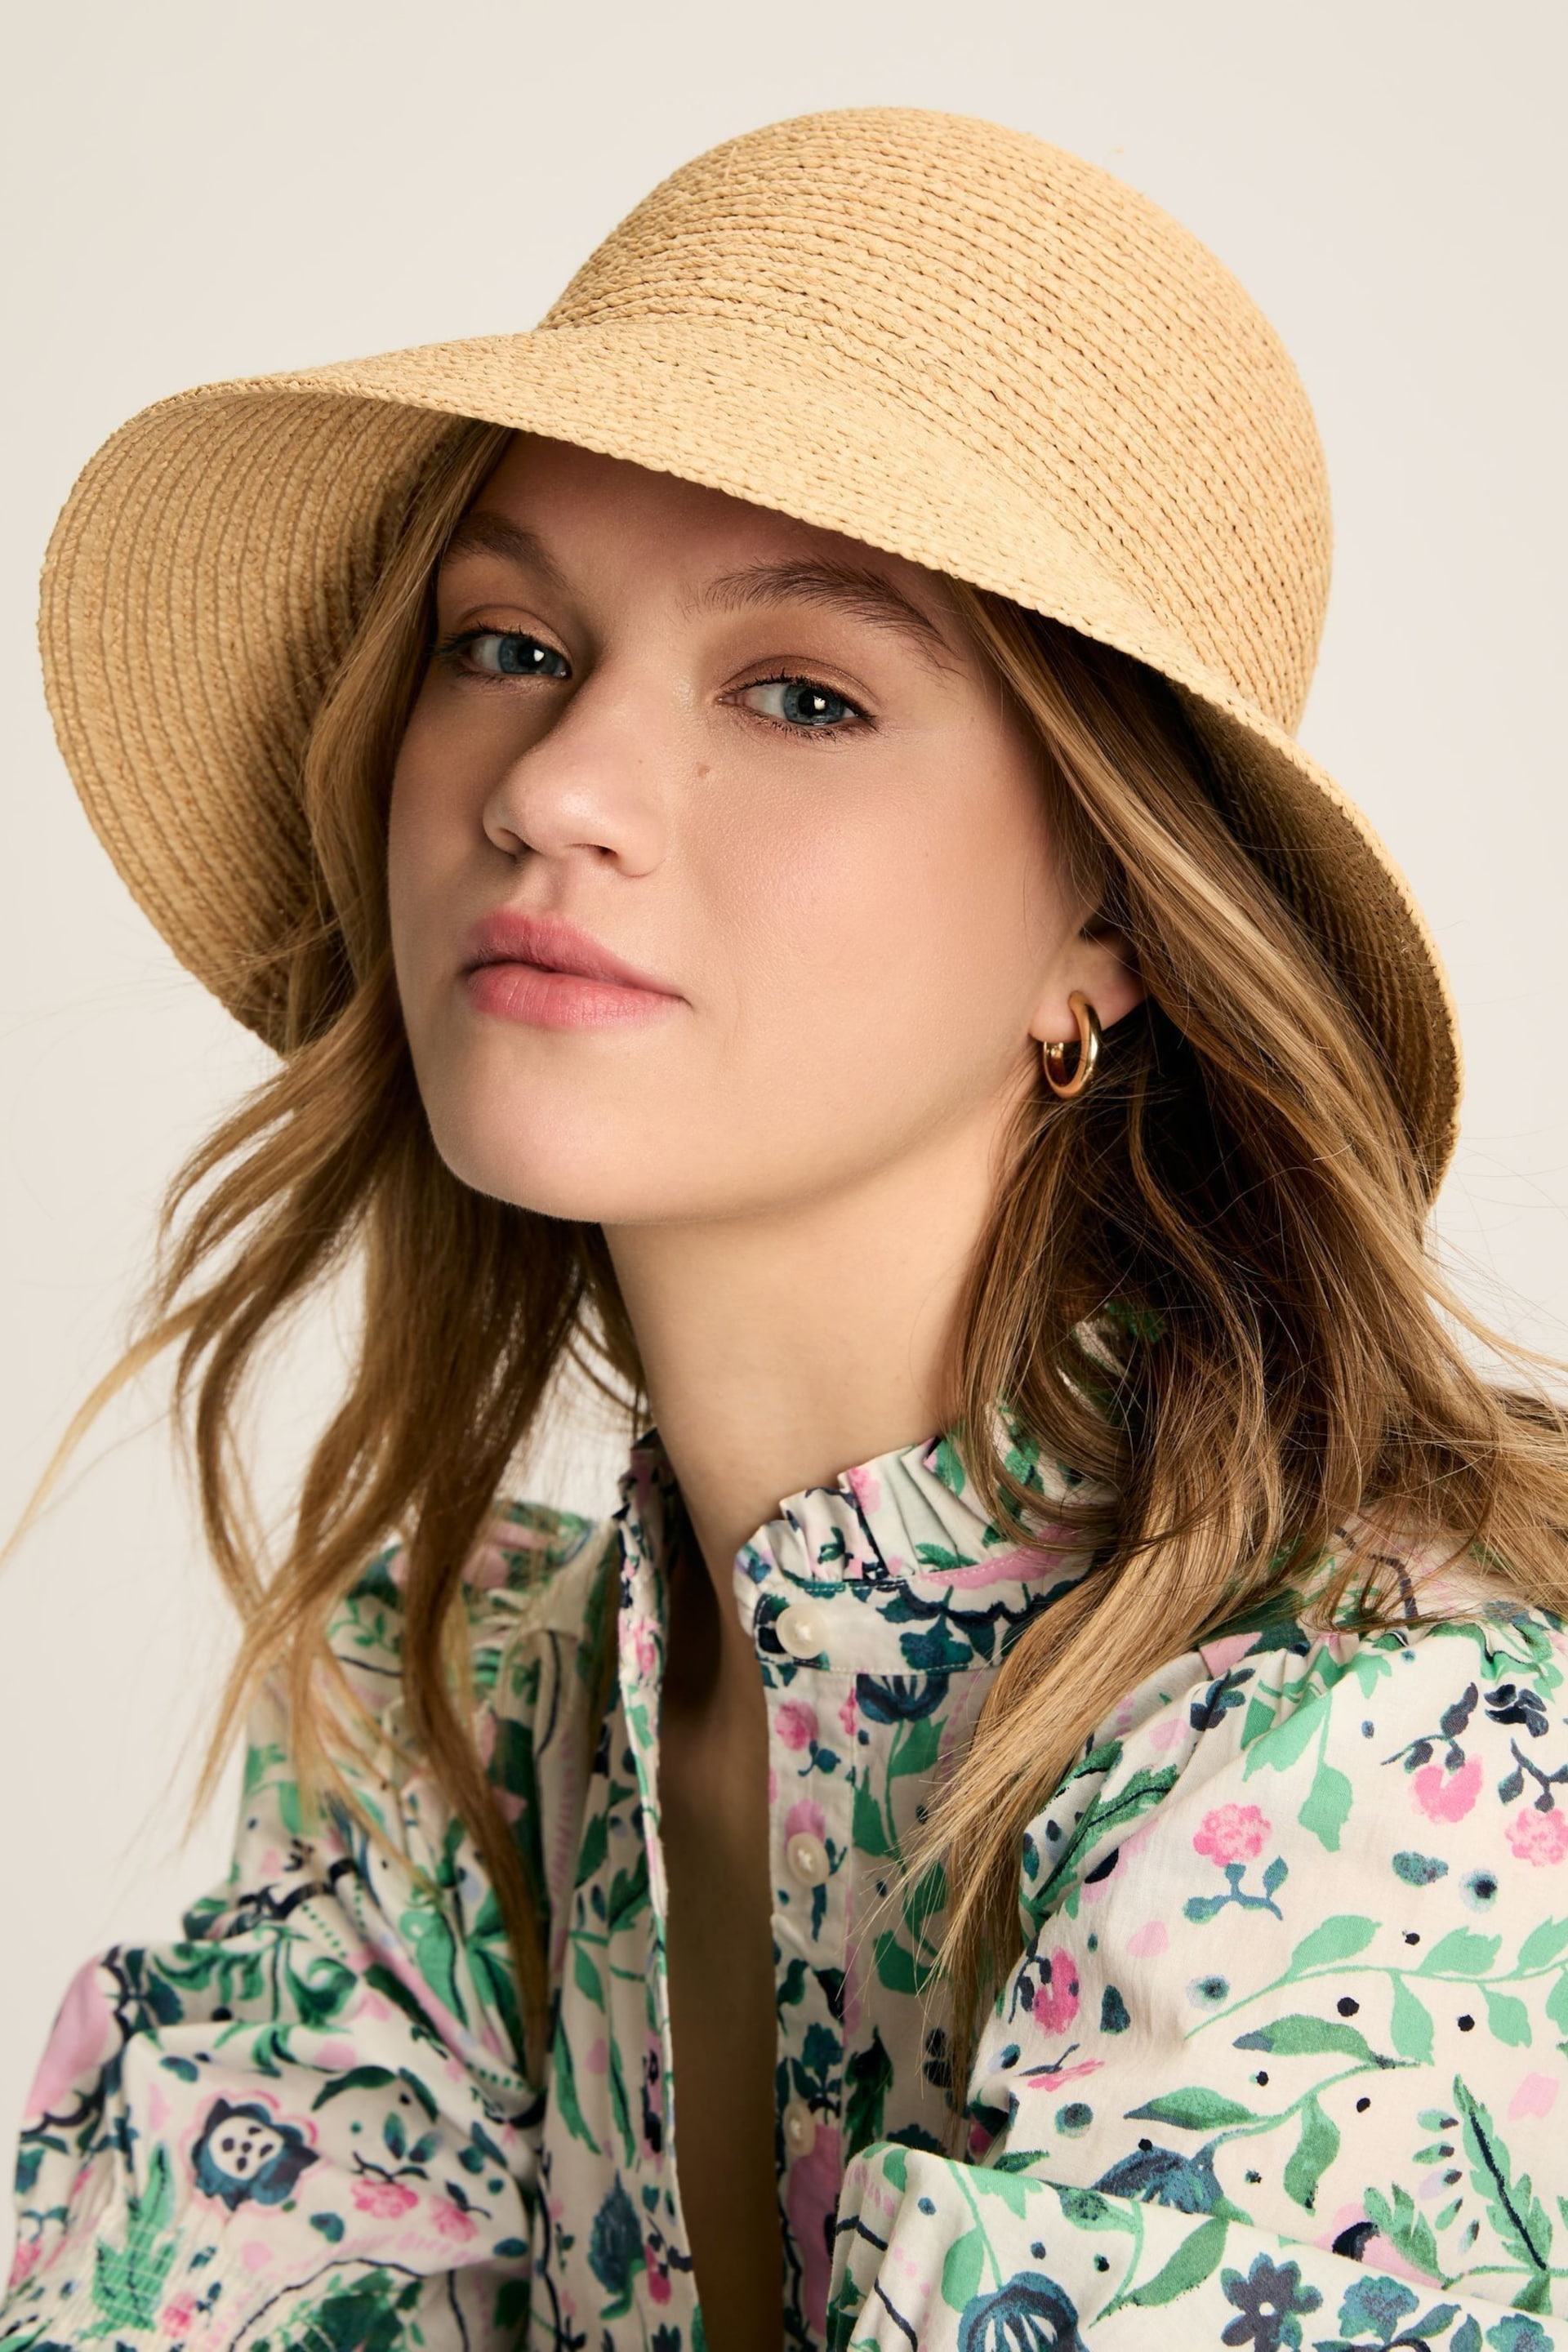 Joules Albany Natural Straw Cloche Hat - Image 3 of 5